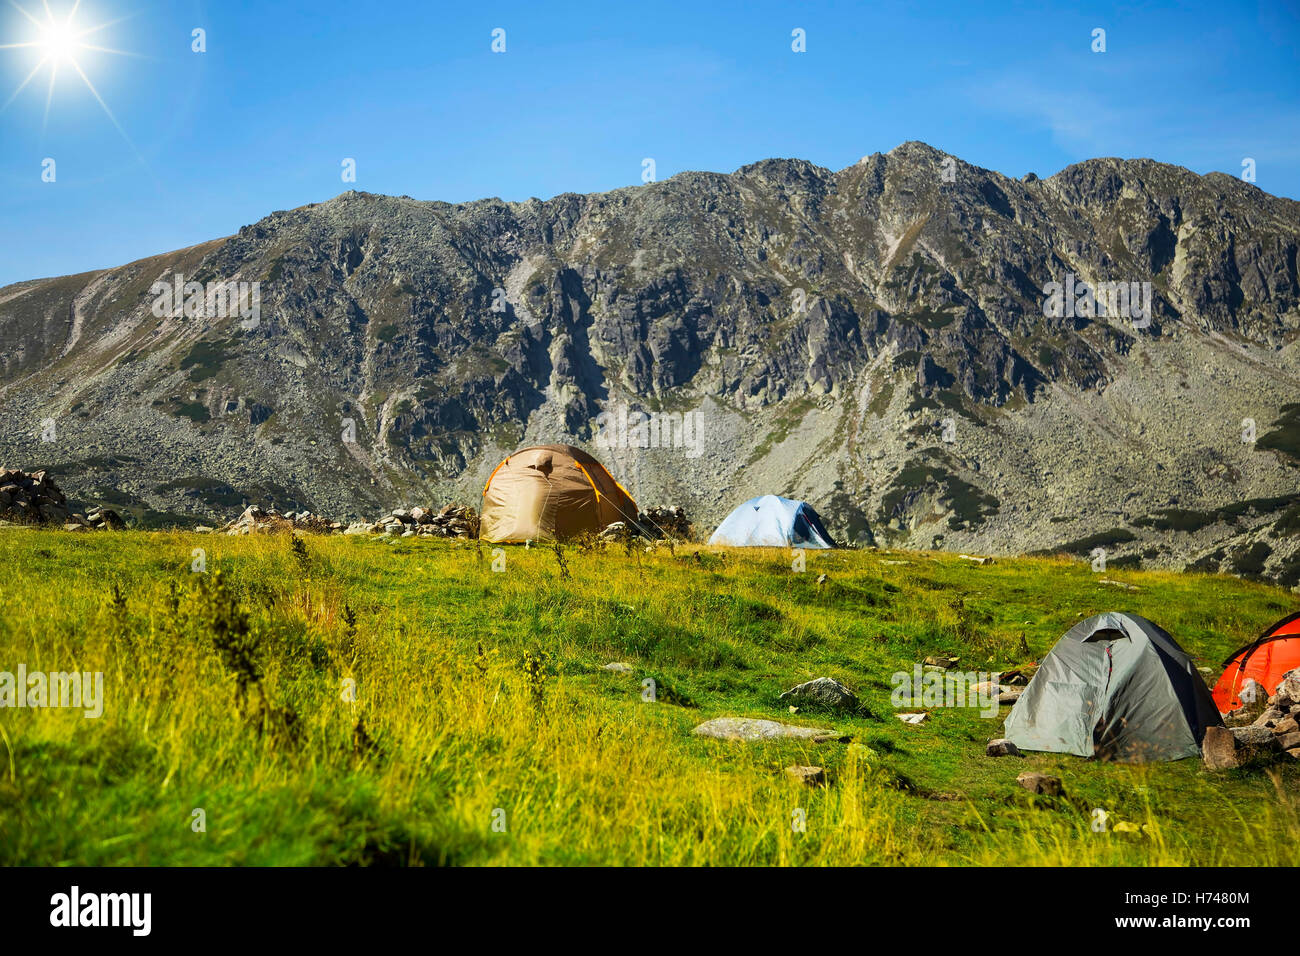 Sunny summer mountain alpine landscape with camping tents Stock Photo